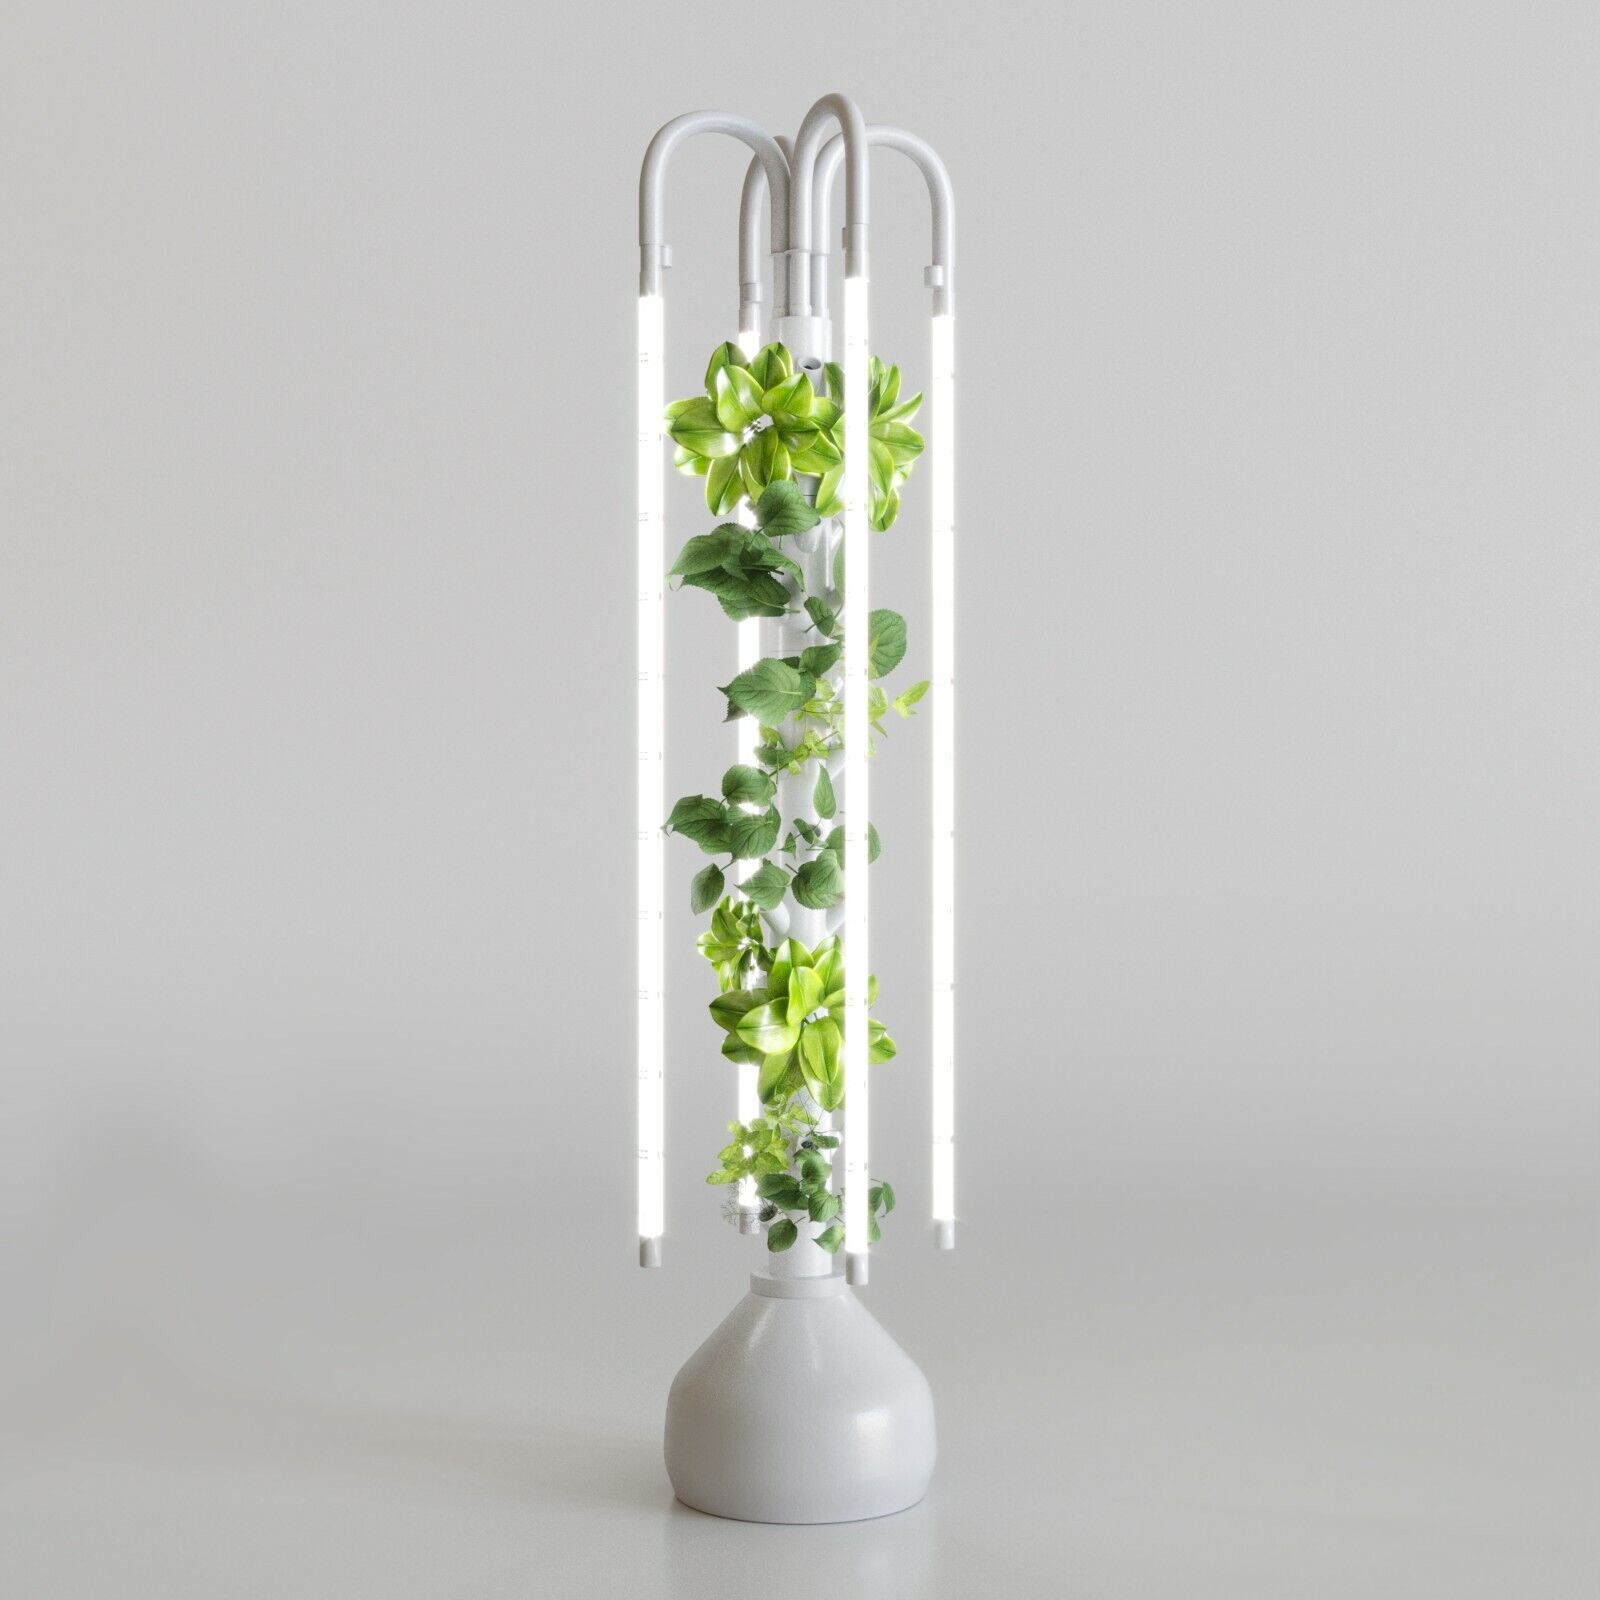 Hydro Designs Hydroponic Garden Tower With Lighting System. Grow up to 36 plants